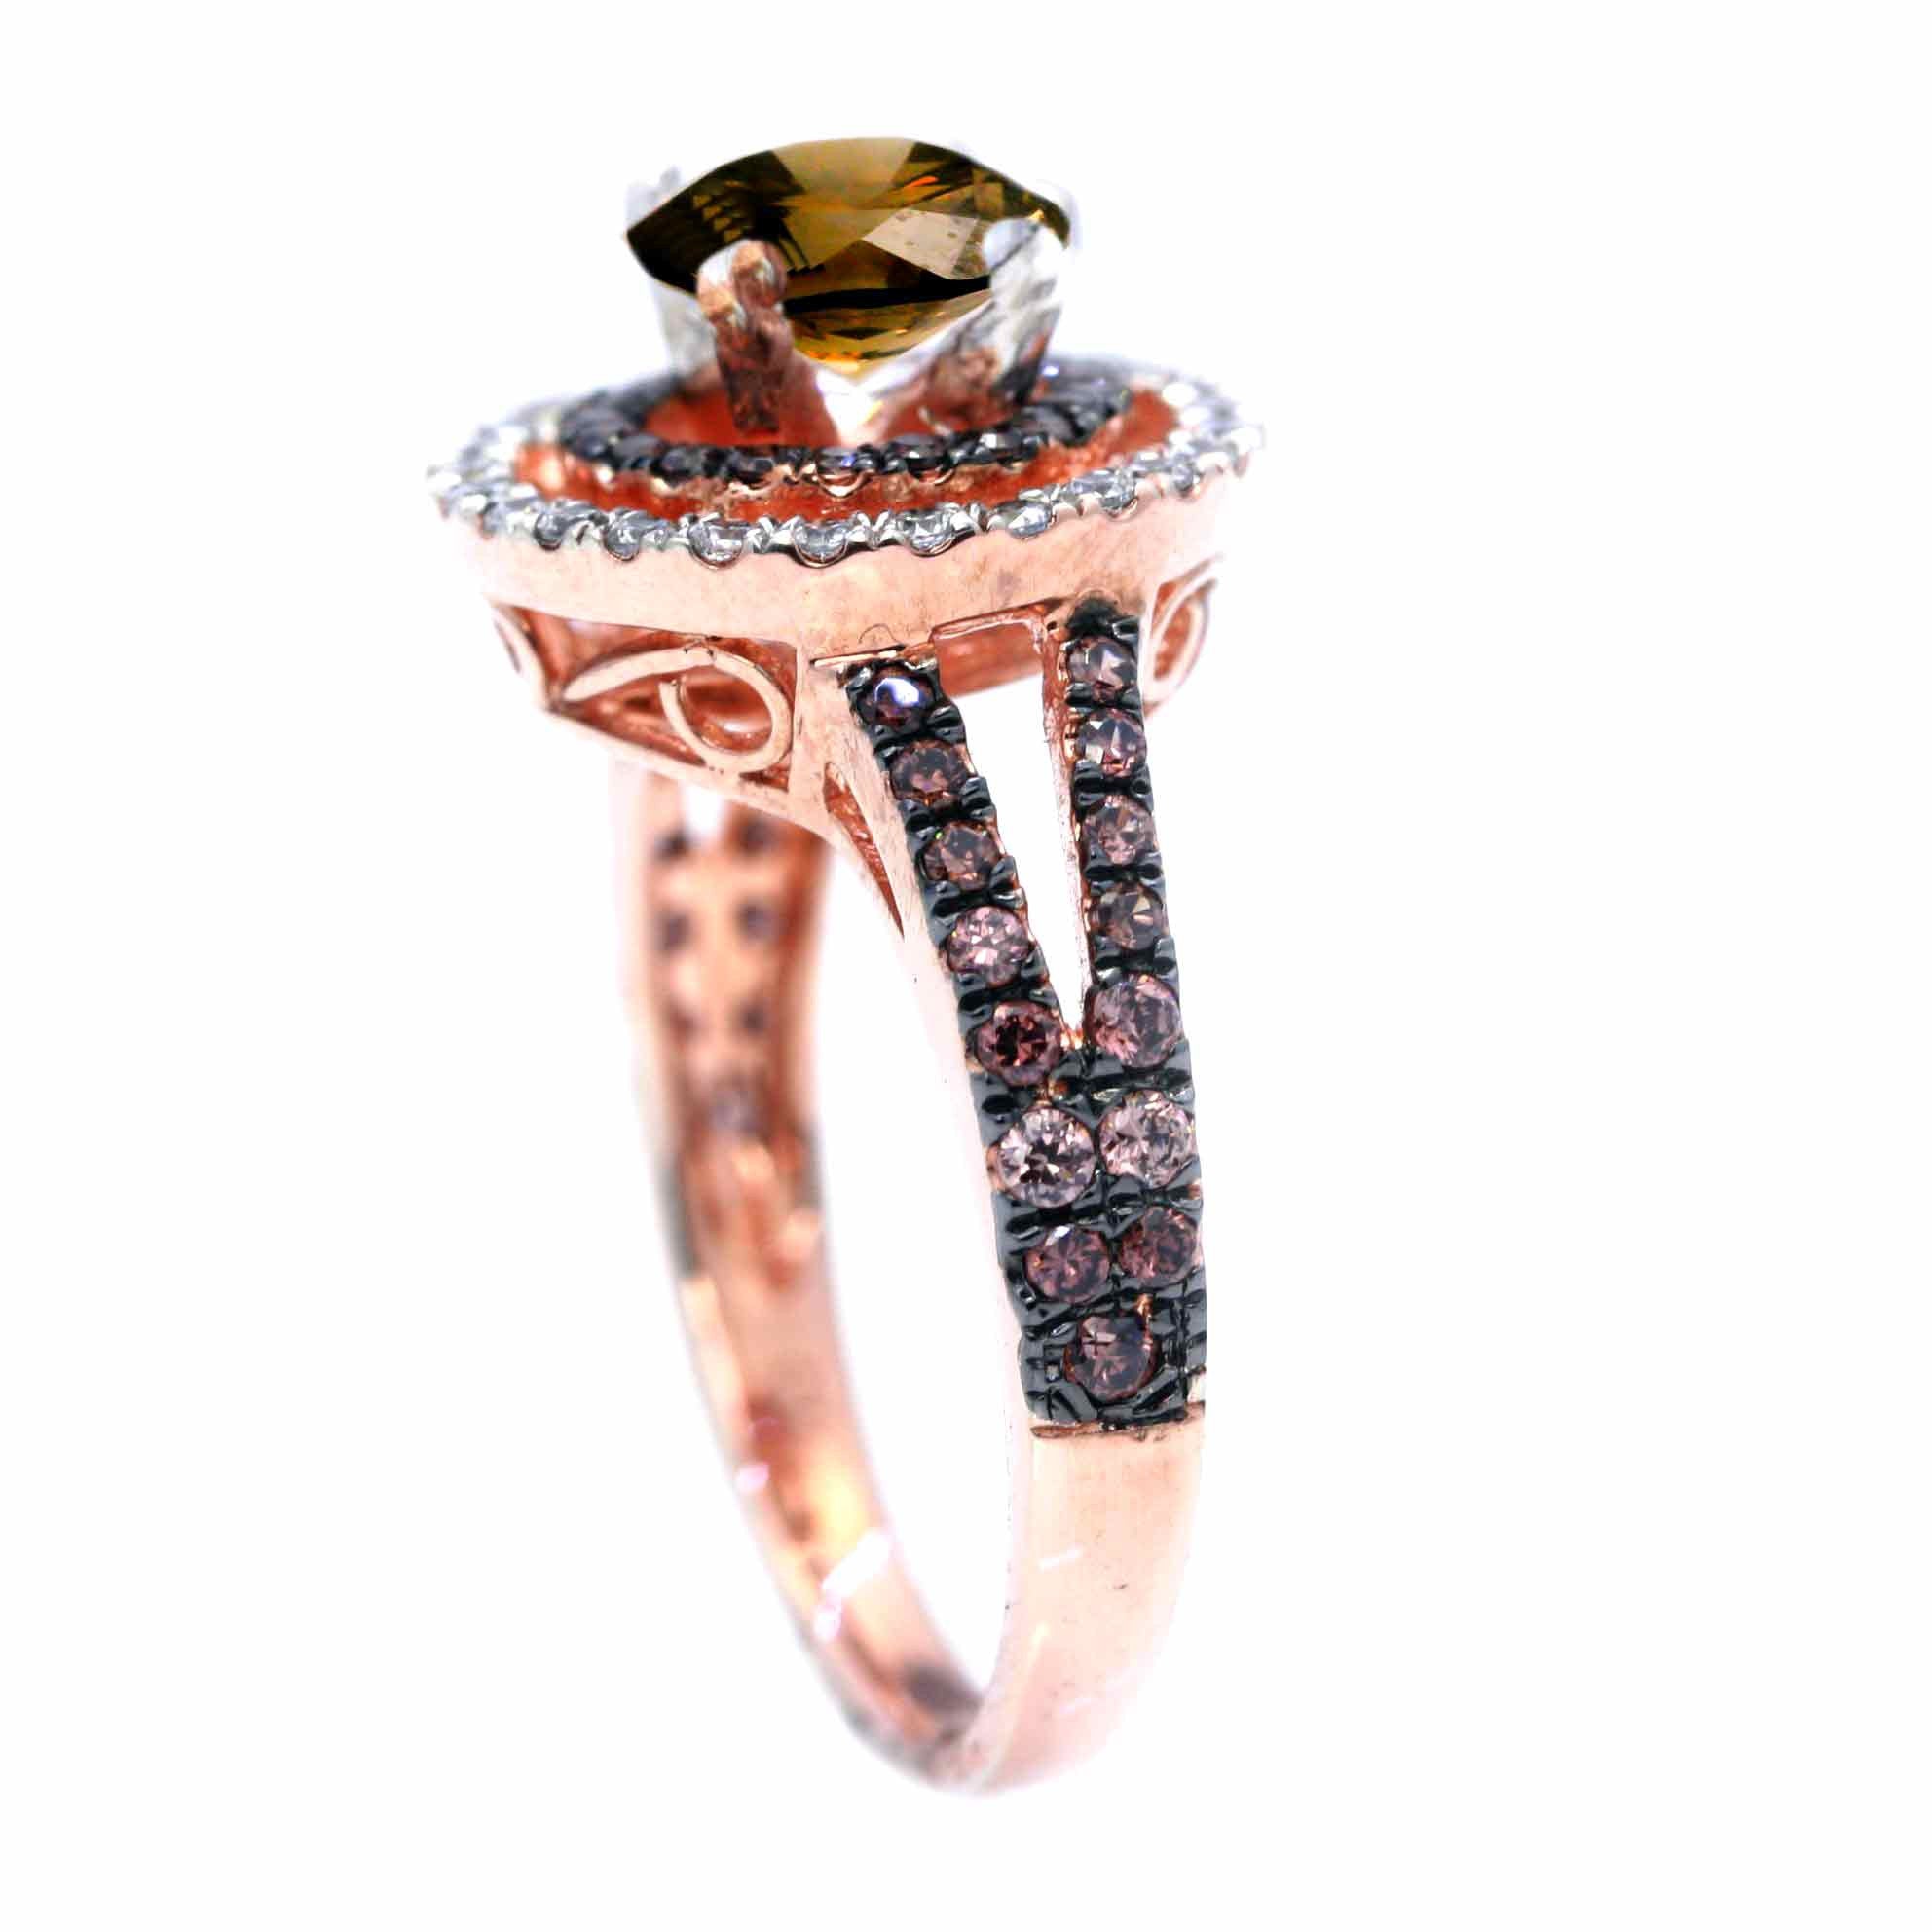 1 Carat Fancy Brown Smoky Quartz Floating Halo Rose Gold Engagement Ring, White & Brown Diamond Accent Stones, Anniversary Ring - SQ94612